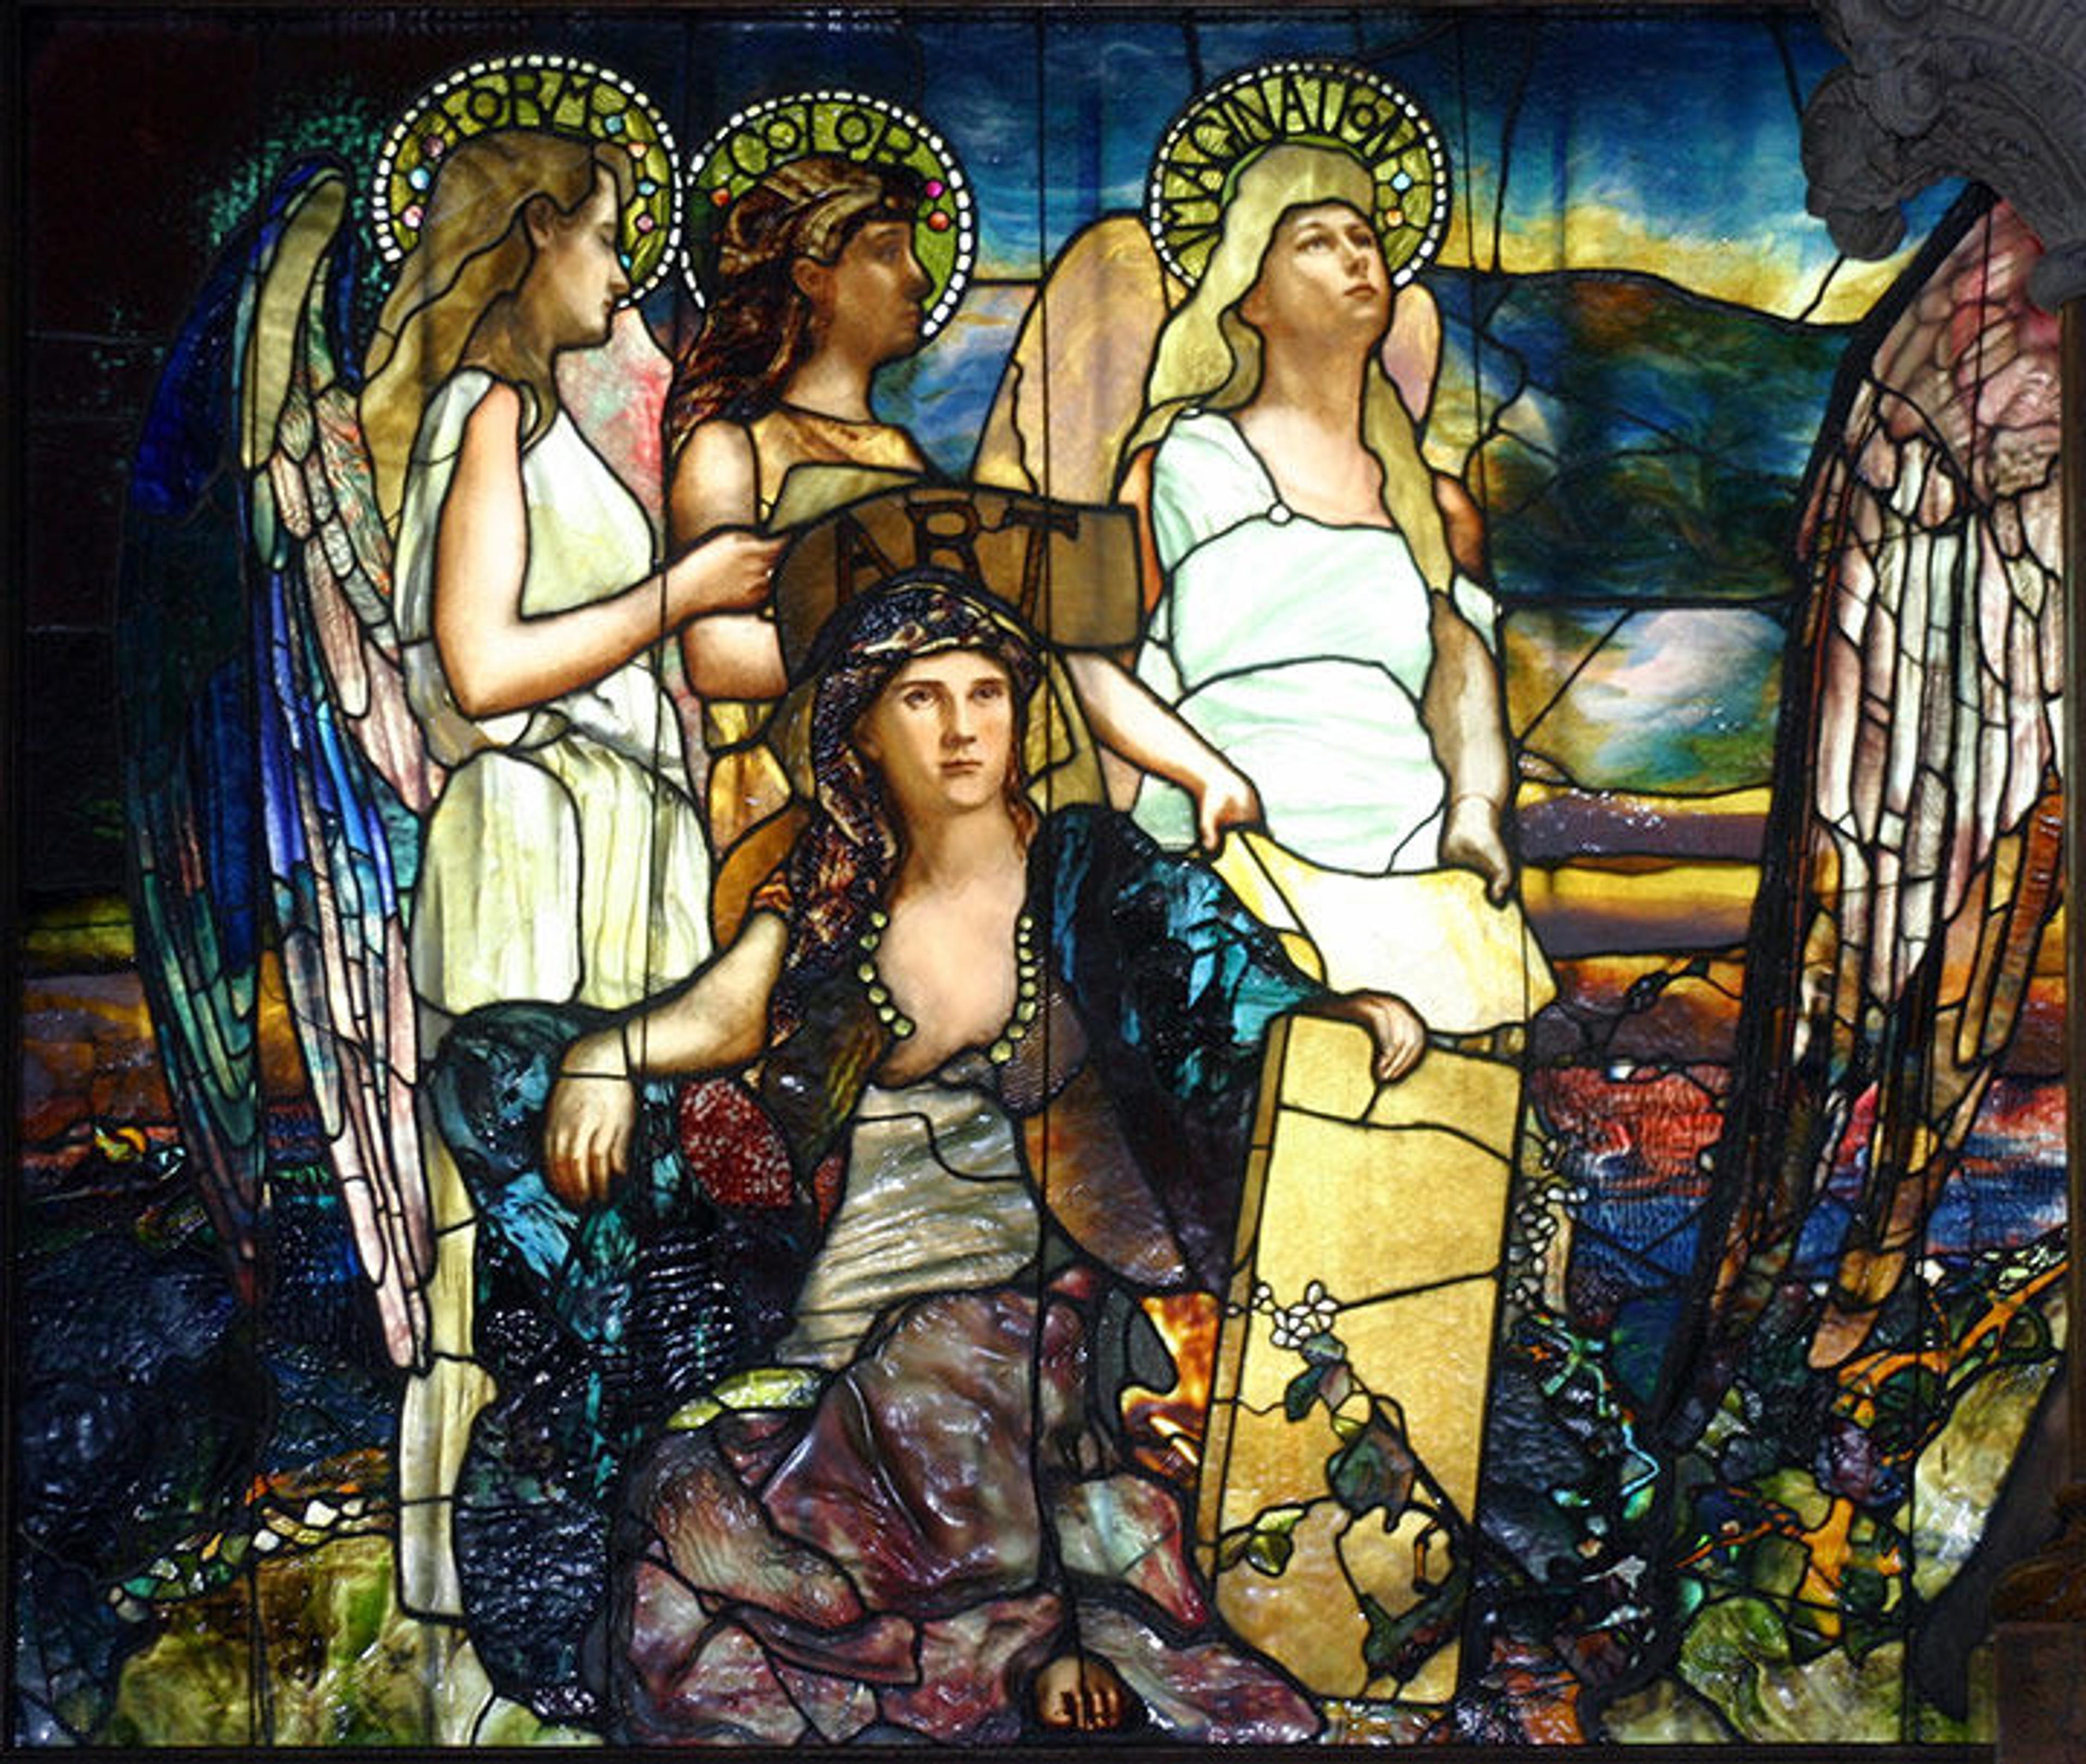 Louis Comfort Tiffany's Canada stained glass